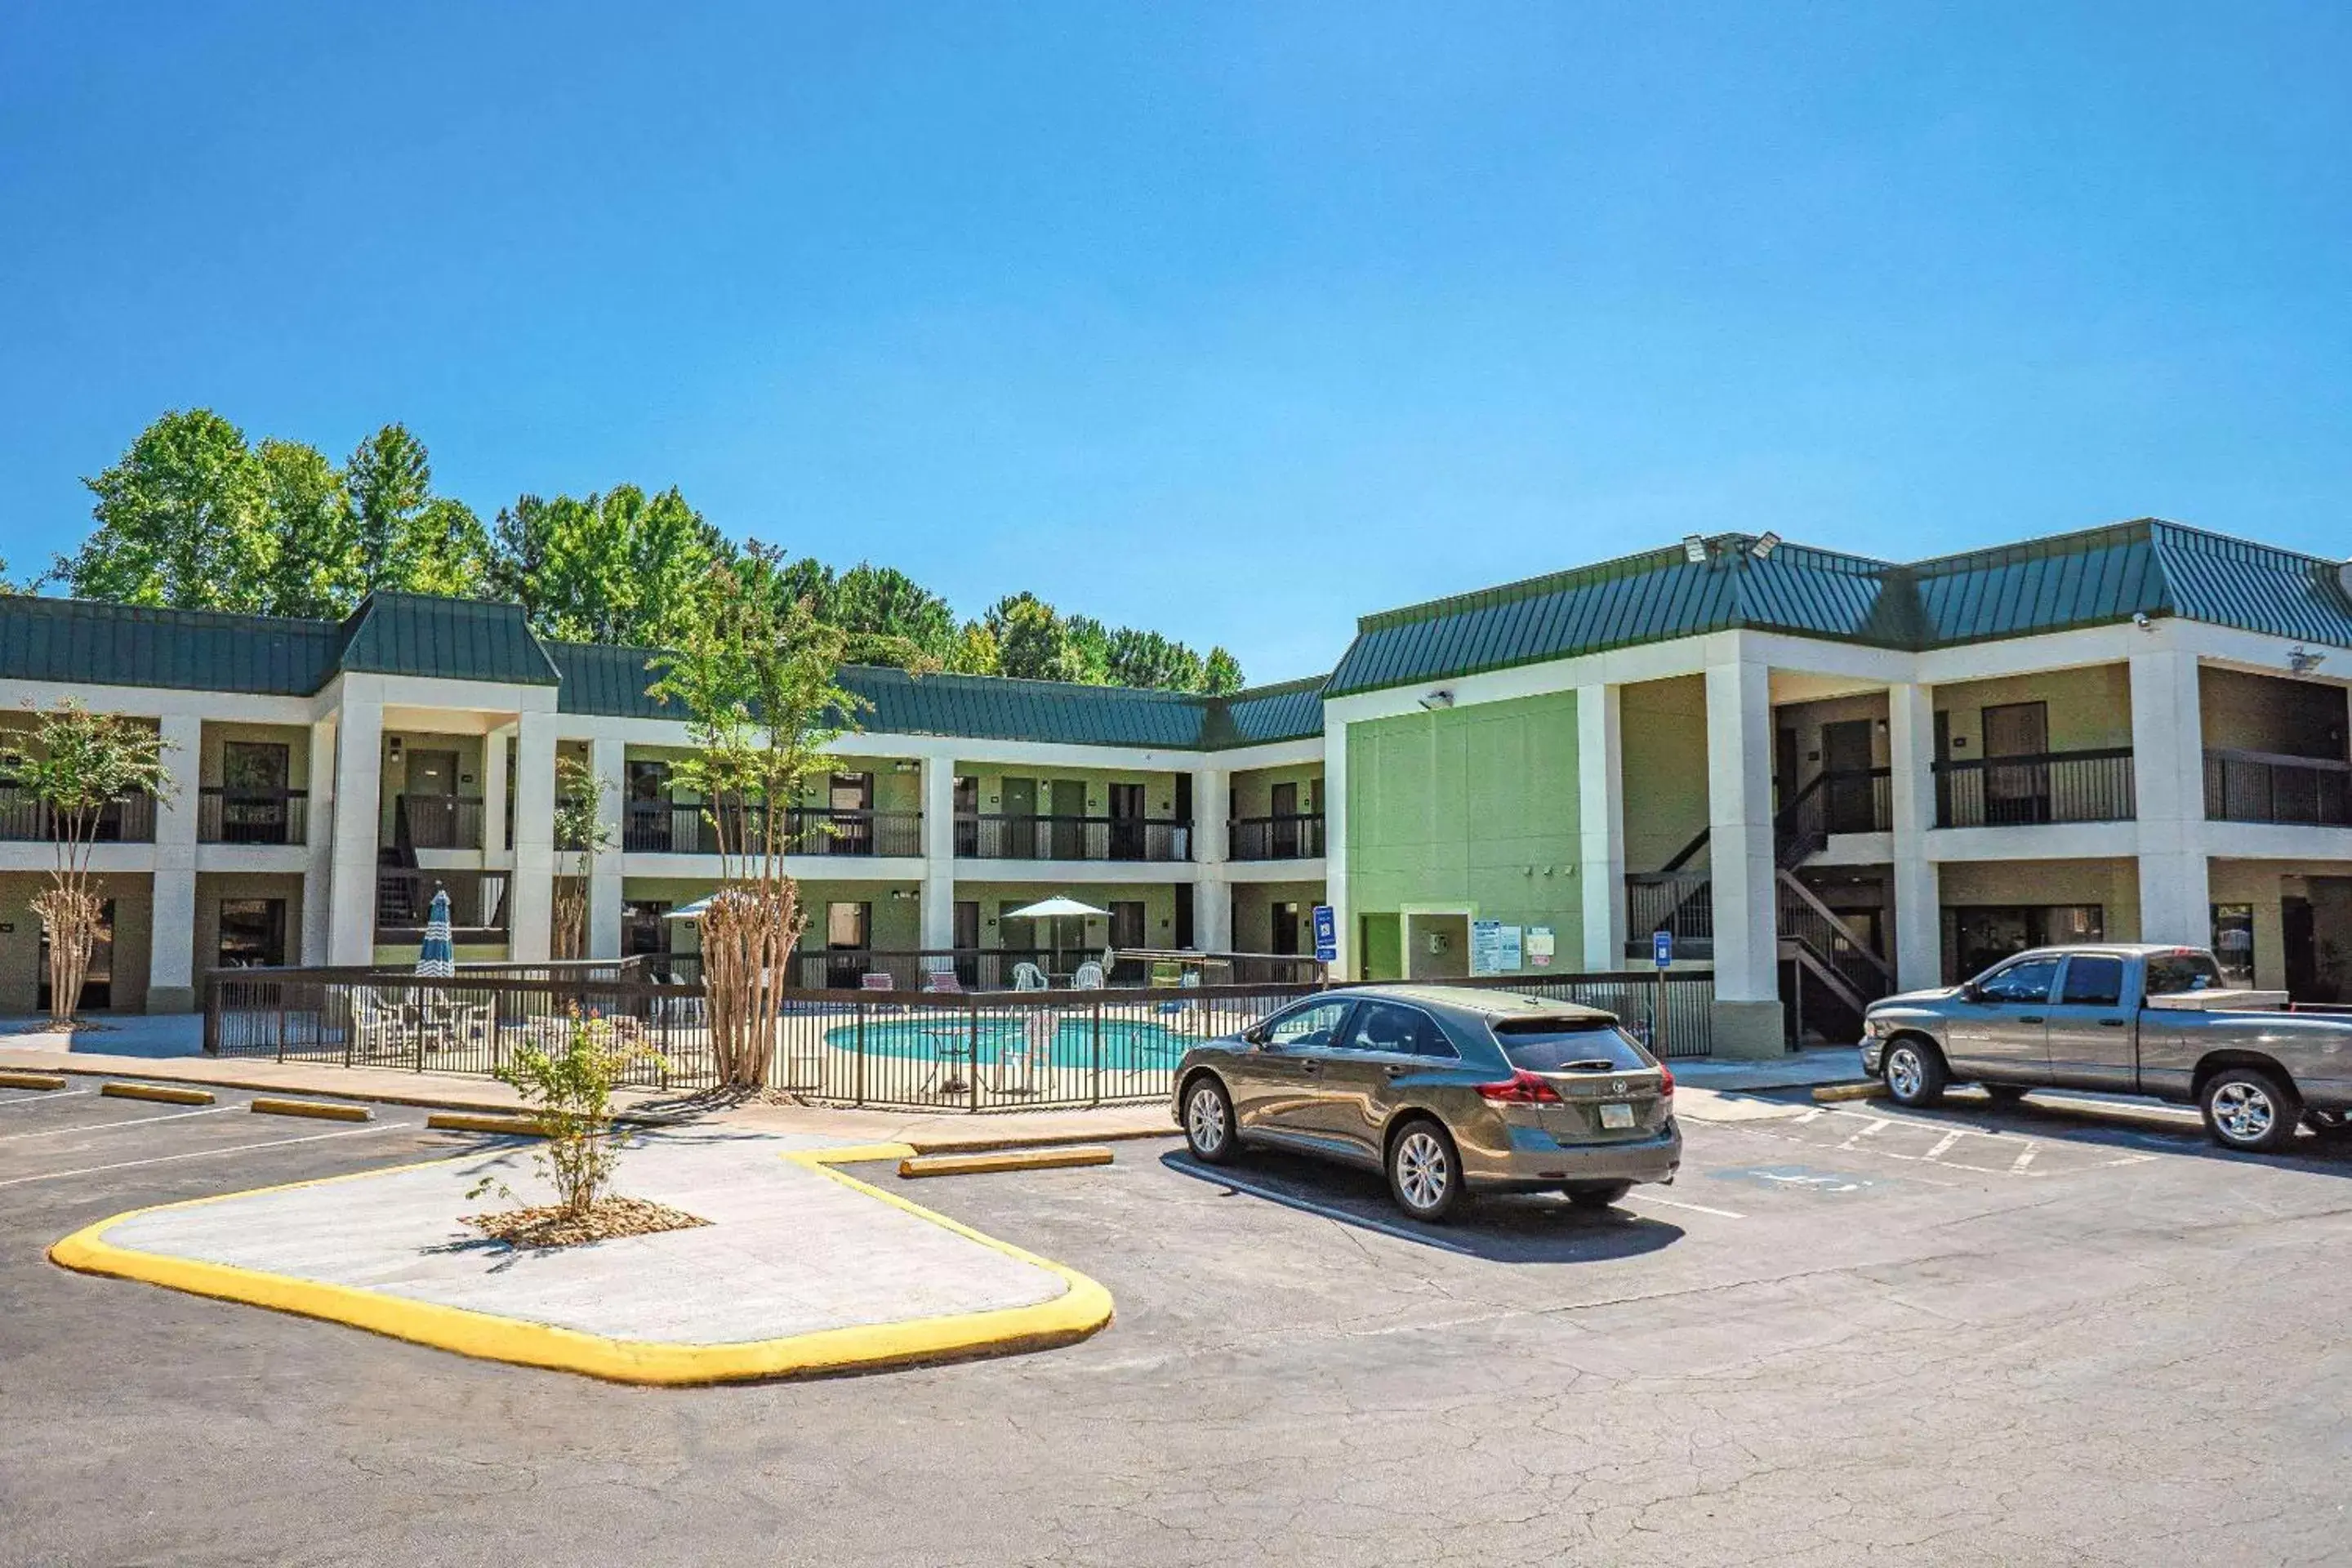 Property Building in Quality Inn & Suites near Six Flags - Austell